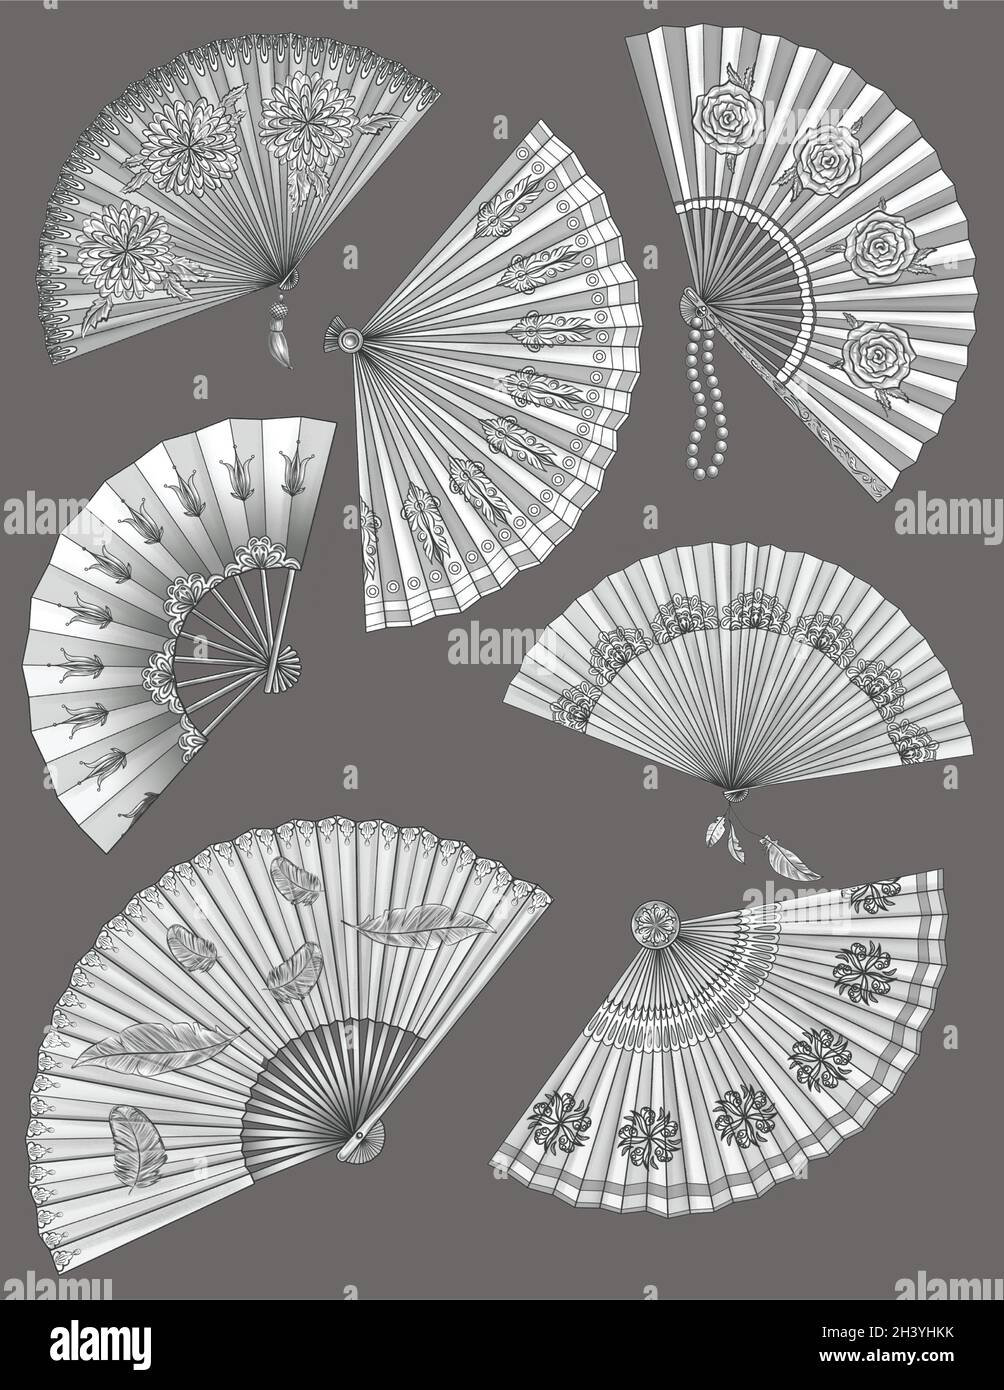 Different Designs Of Antique Foldable Handheld Fan Colorless Line Drawing. Multiple Vintage Open Fold Fans Coloring Book Page. Stock Photo